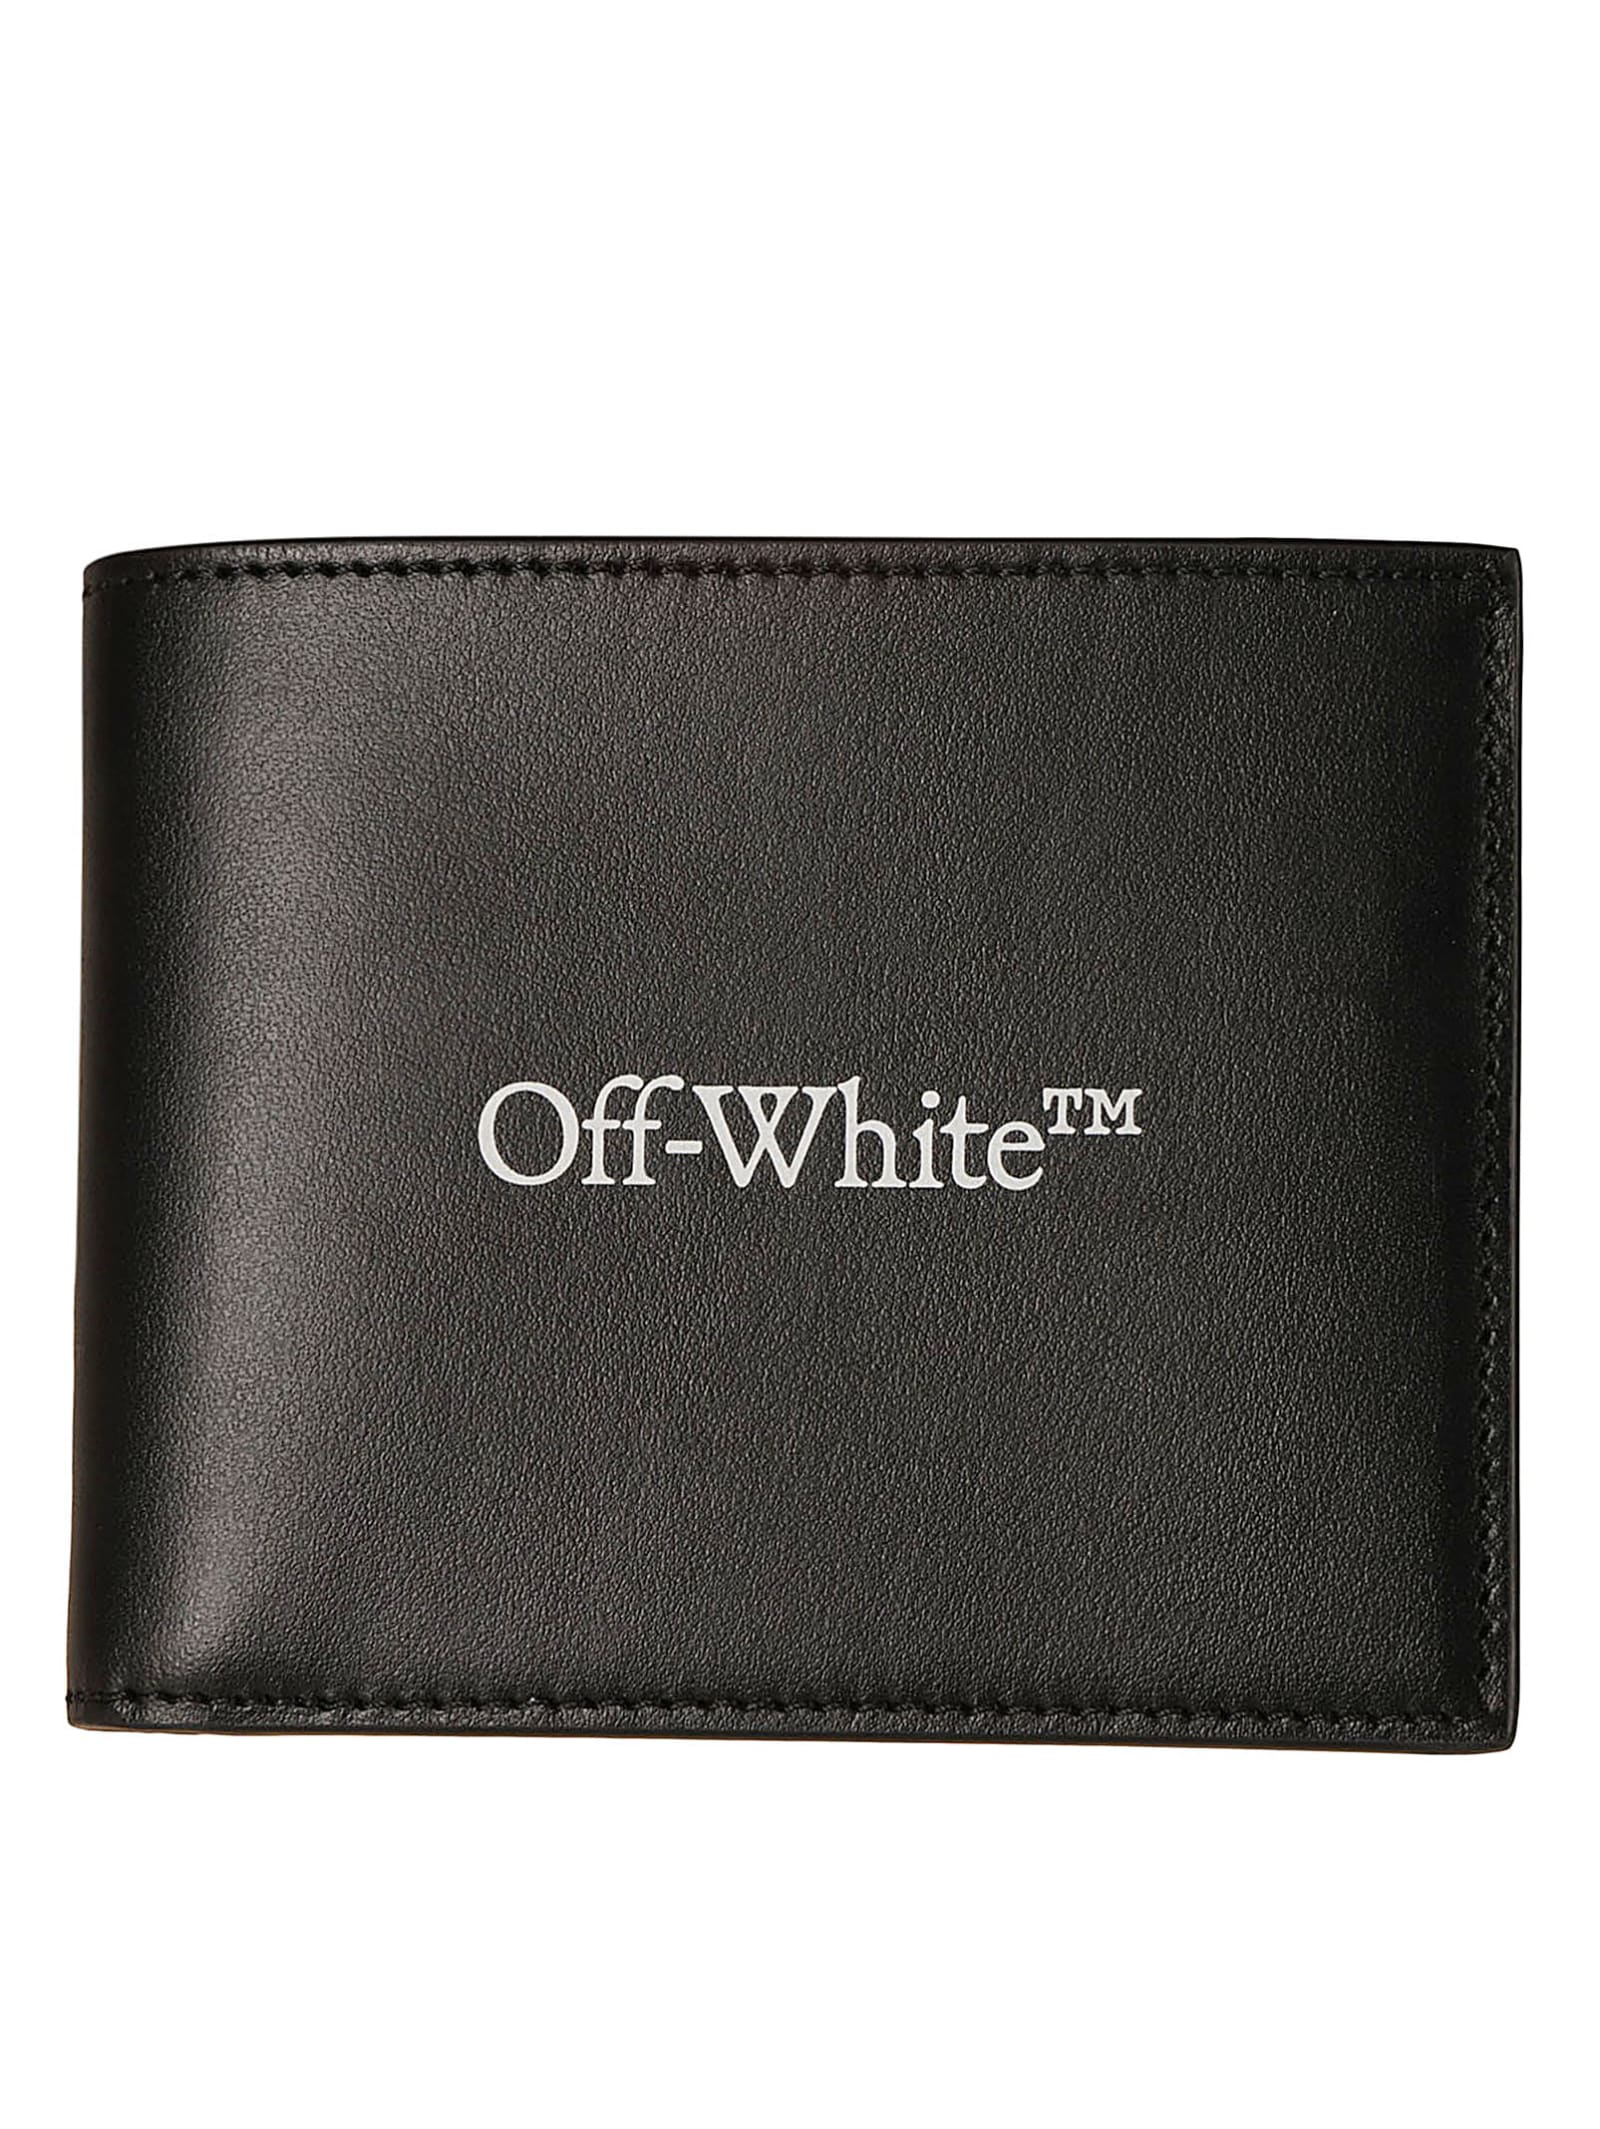 Off-white Bookish Bifold Wallet In Black/white